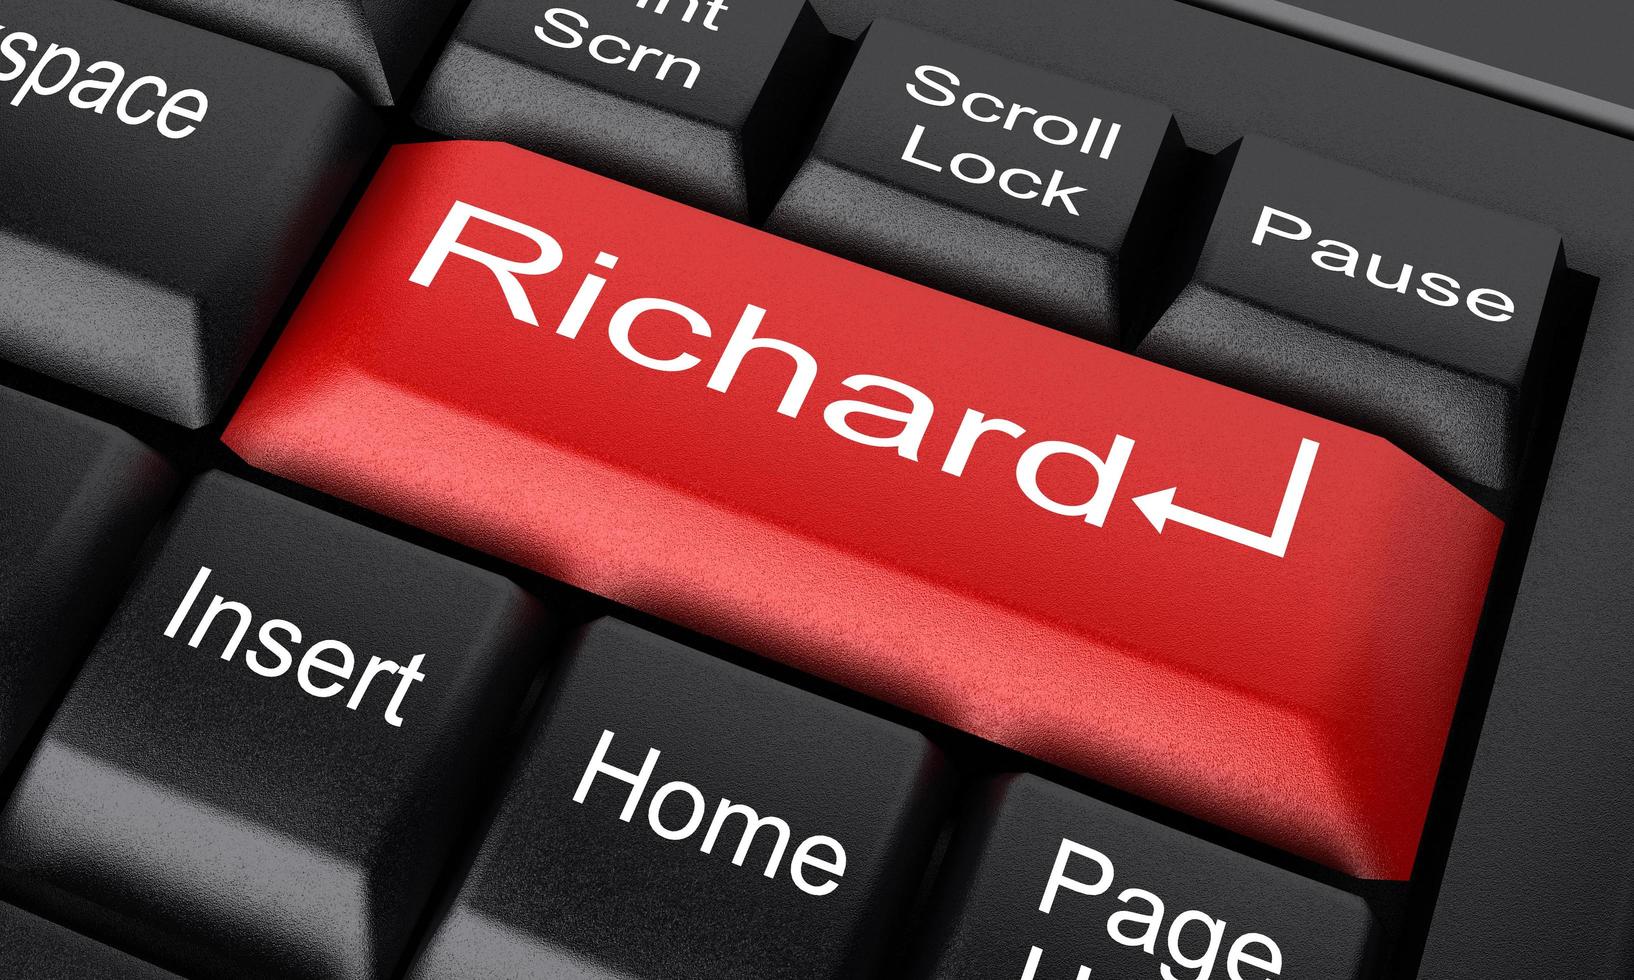 Richard word on red keyboard button photo